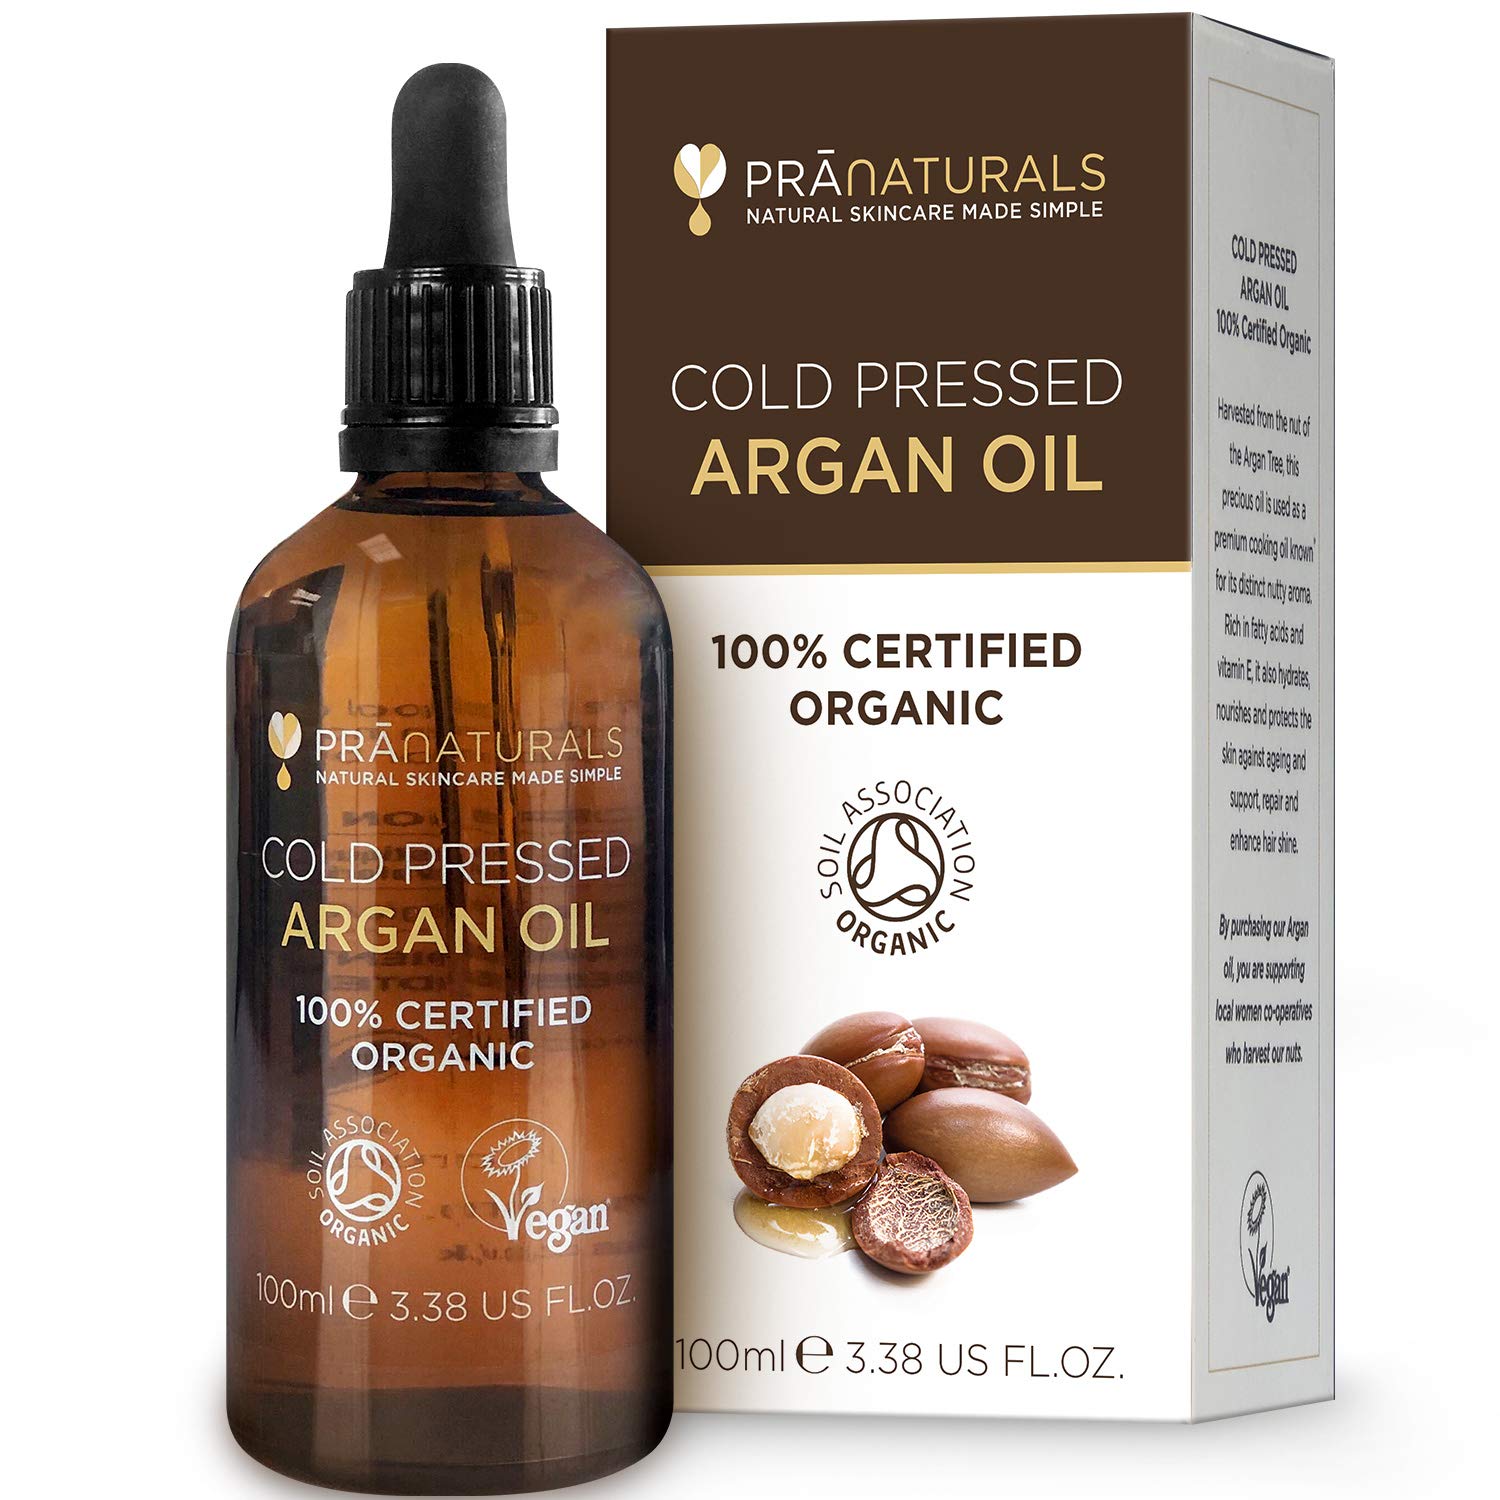 PraNaturals 100% Organic Moroccan Pure Natural Argan Oil for Face & Body 100ml – Rich in Vitamin E for Healthy Skin, Hair & Nails – No Parabens or SLS – Vegan, Cruelty-Free